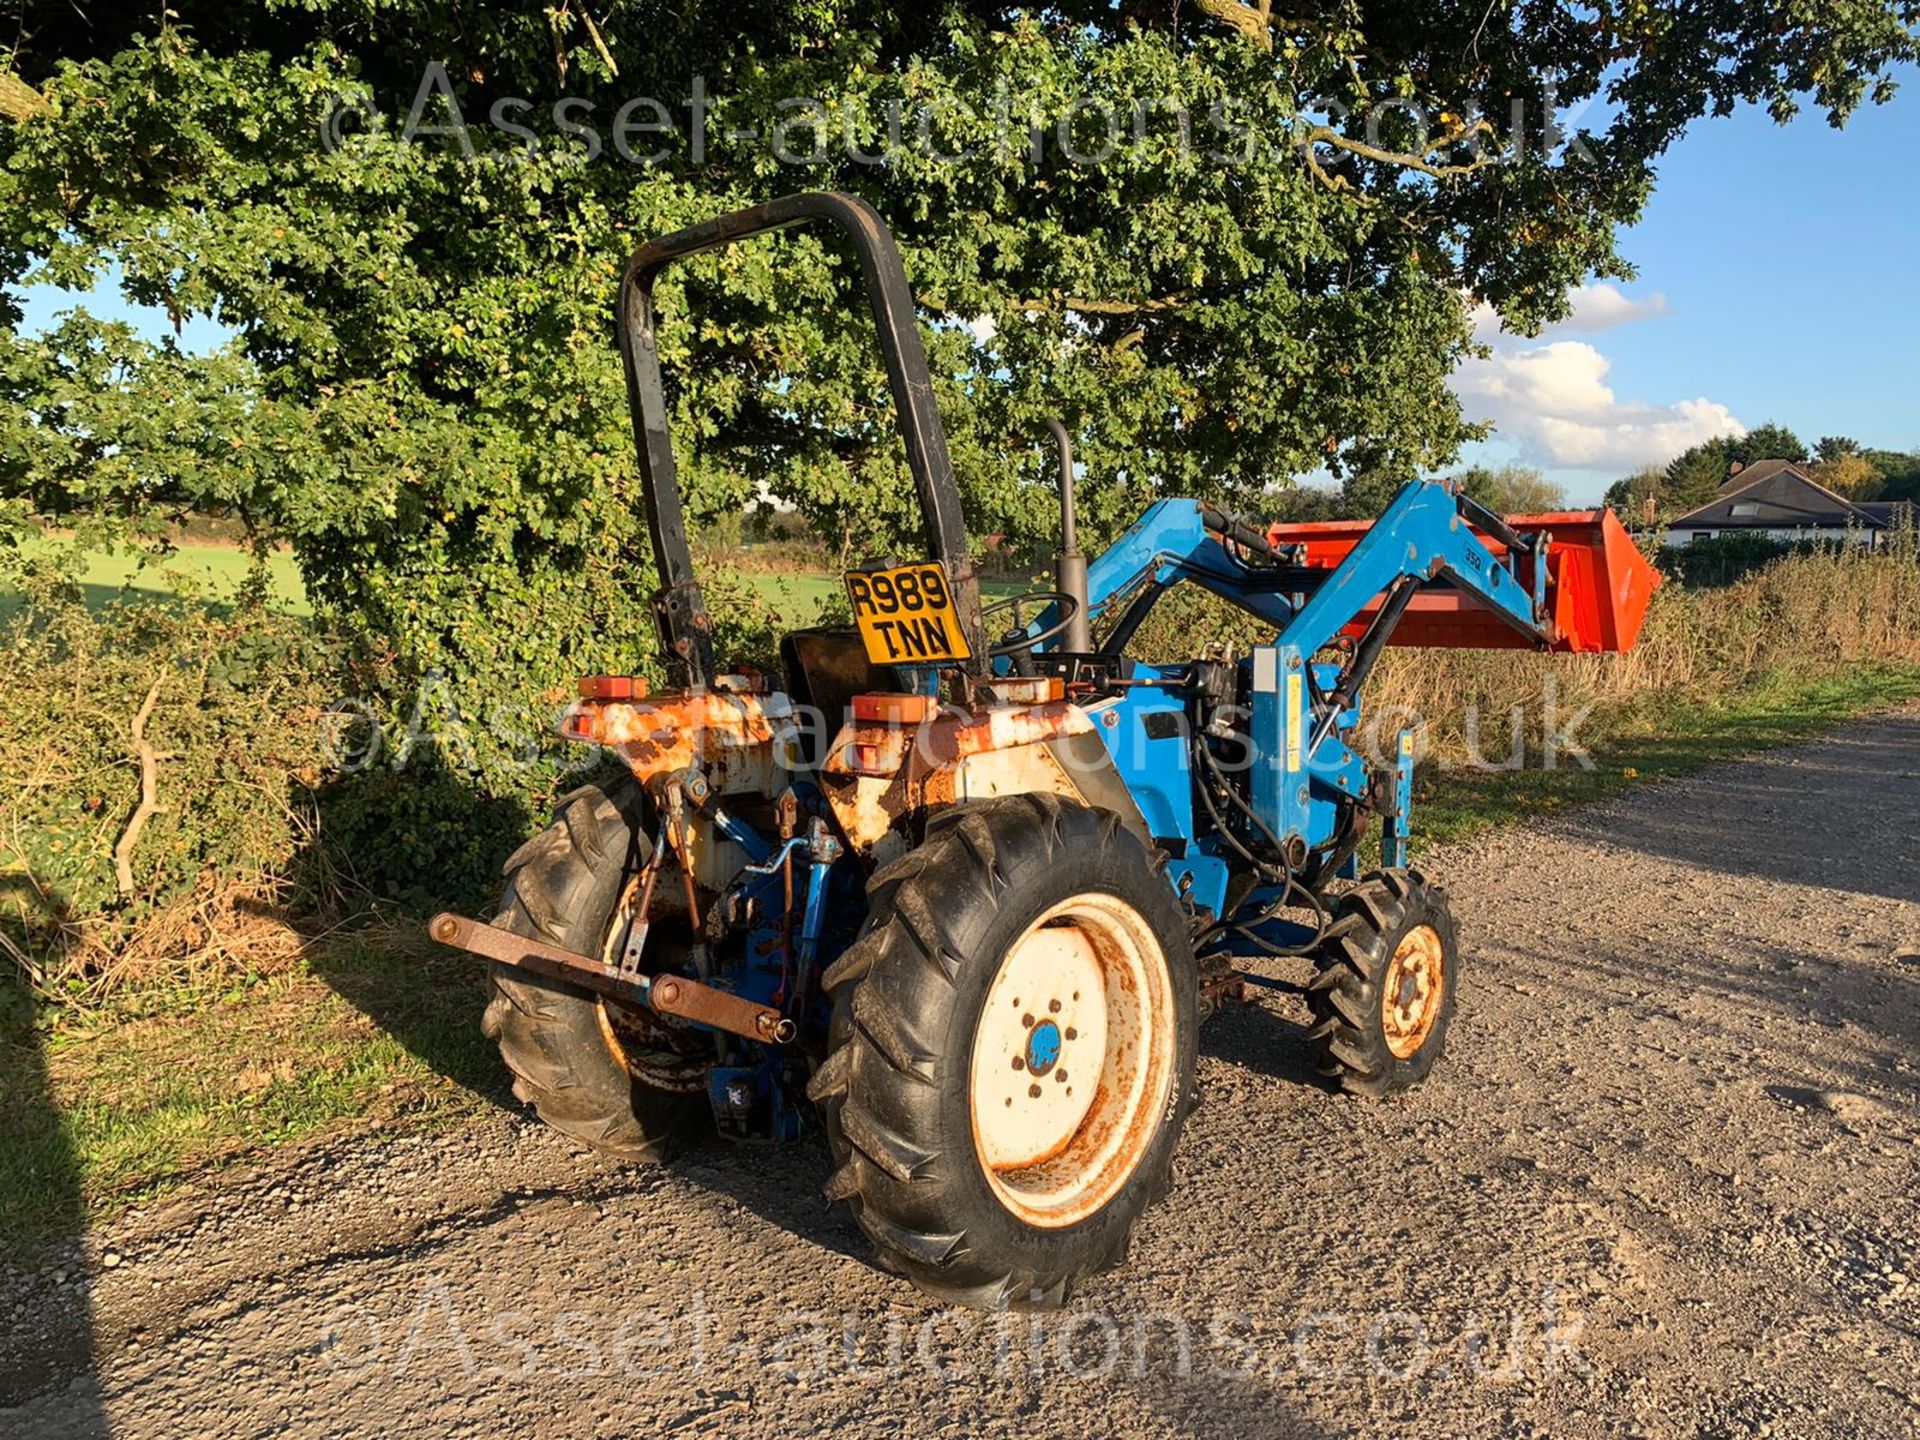 FORD 1720 28hp 4WD COMPACT TRACTOR WITH LEWIS 35Q FRONT LOADER AND BUCKET, RUNS DRIVES LIFTS WELL - Image 13 of 24